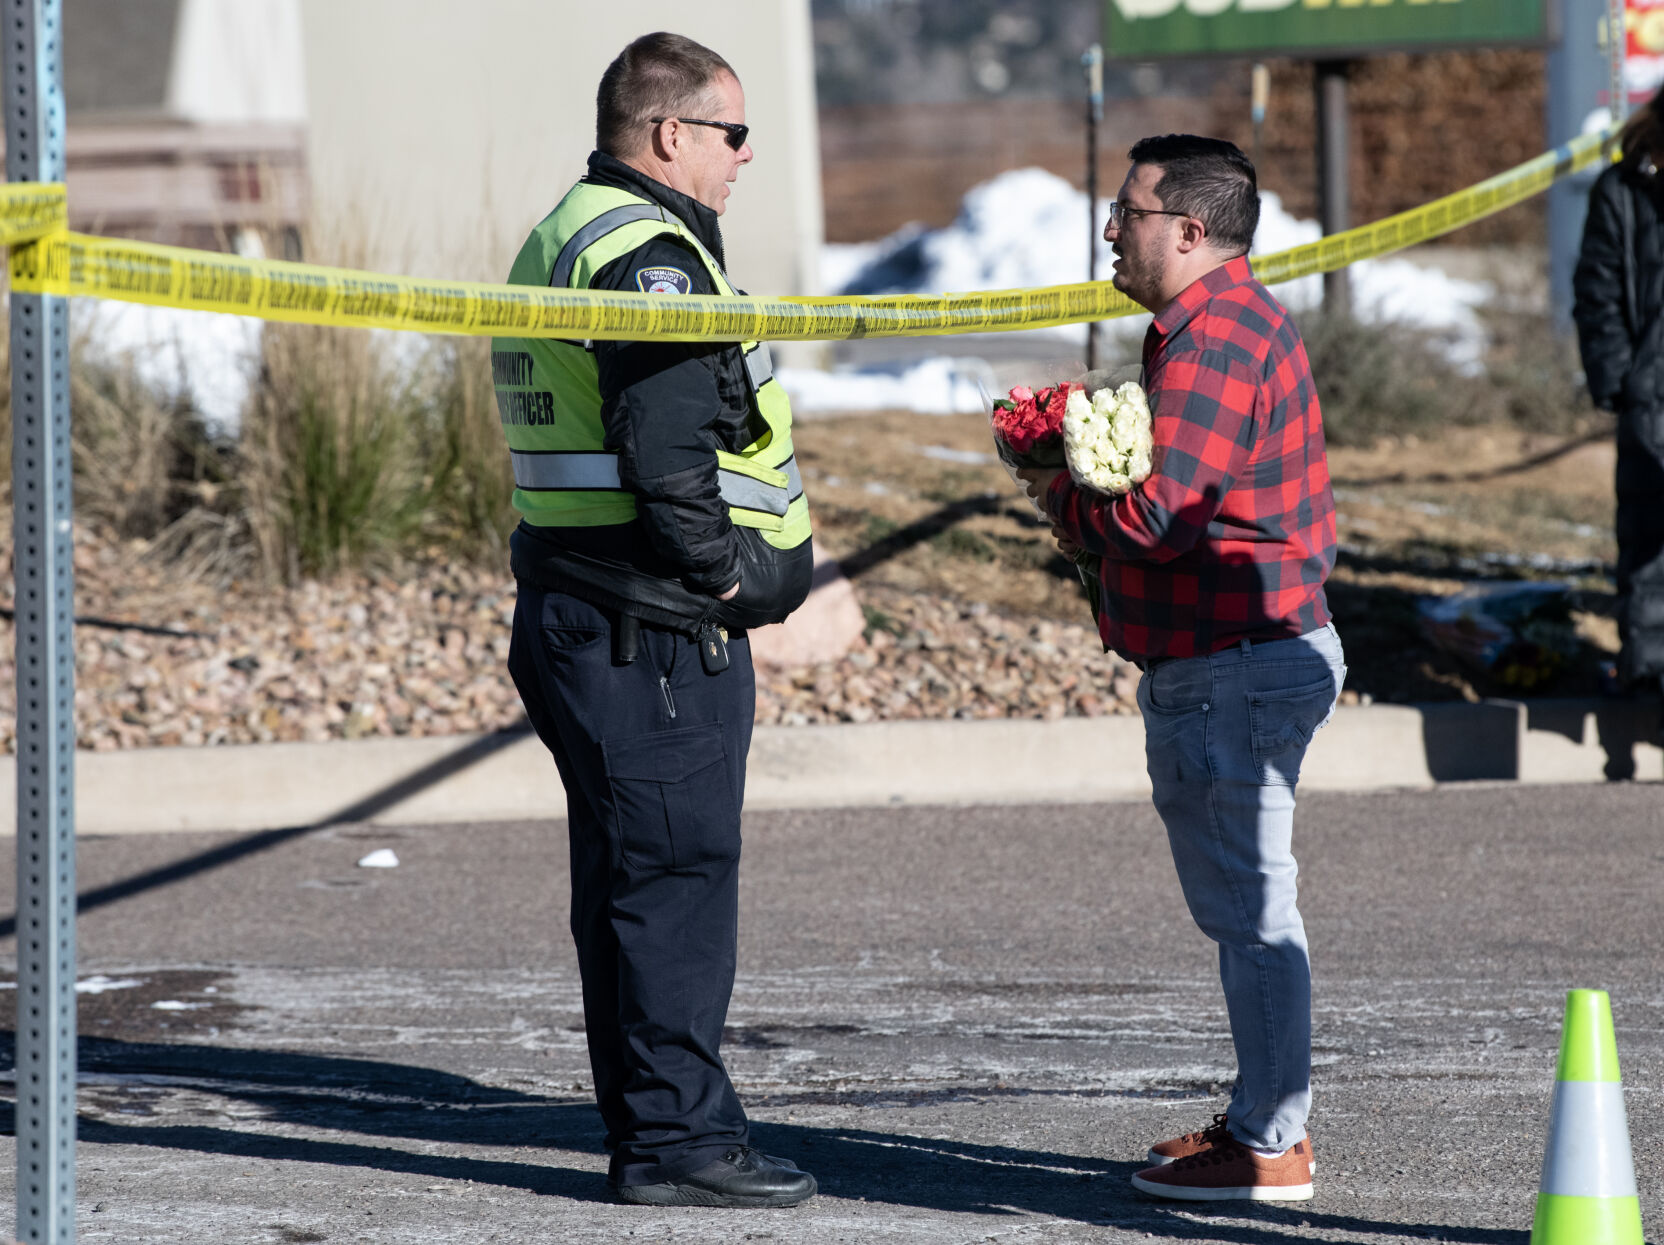 I can't stop hearing the shots': Witnesses describe Colorado